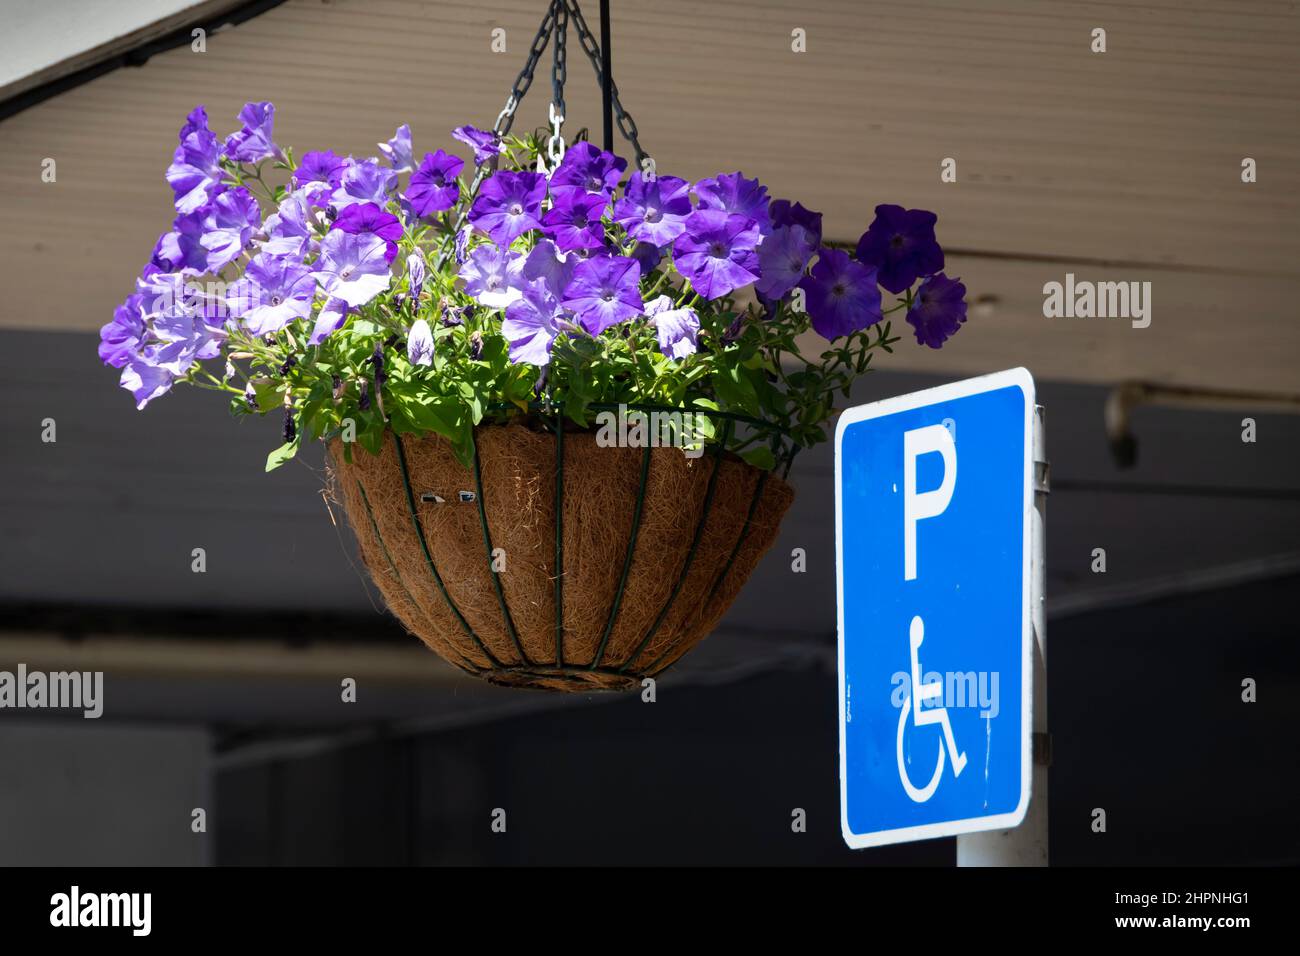 Hanging flower baskets in front of shops, Marton, Rangitikei, North Island, New Zealand Stock Photo